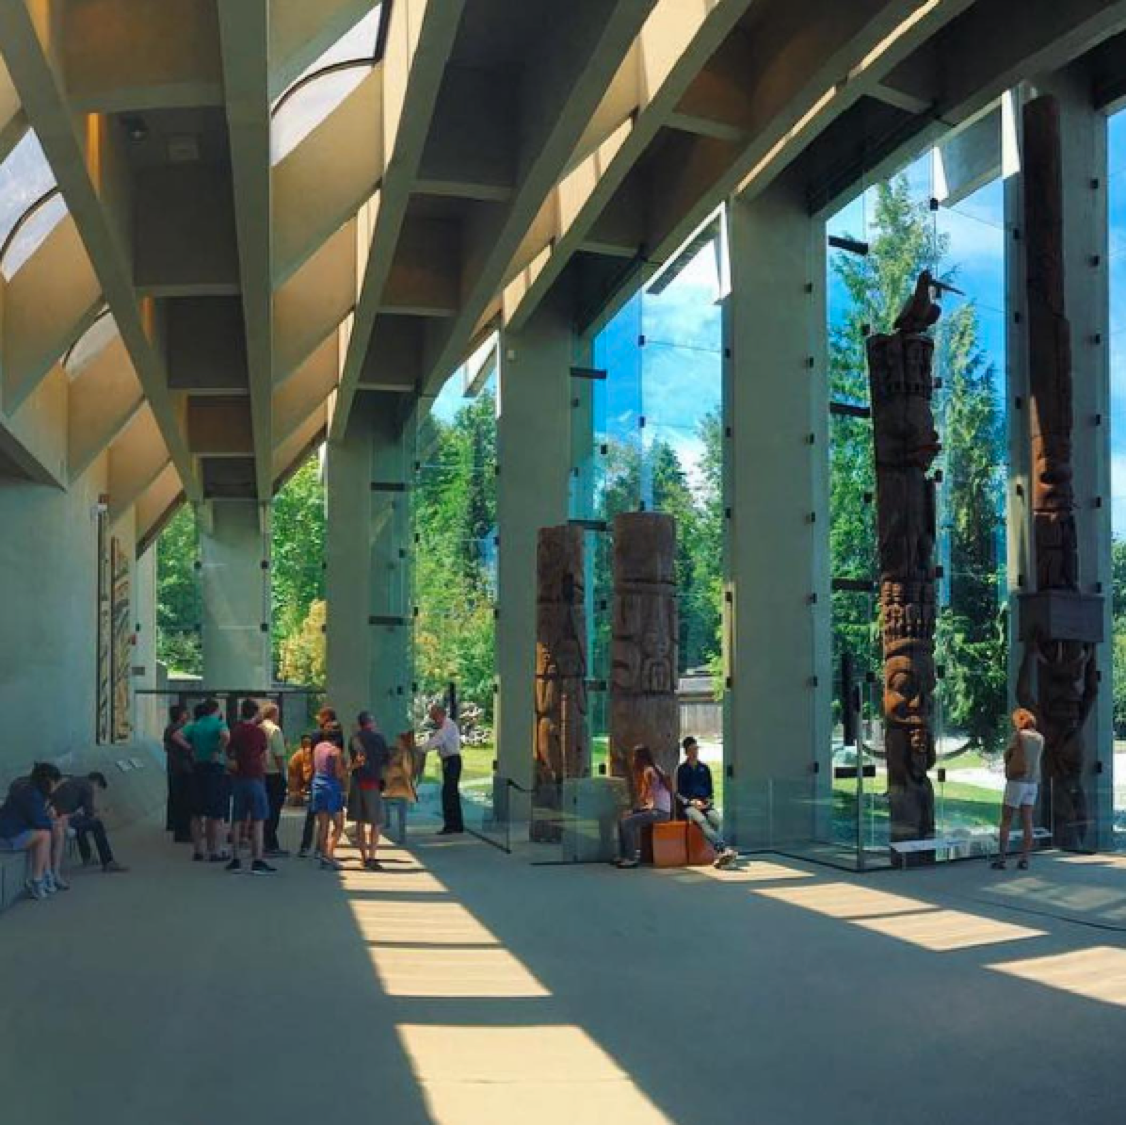 Sun's out @moa_ubc The Museum of Anthropology tells amazing stories about #FirstNation people through exhibits about their art.   #Repost @fleex3 #UBC #yvr